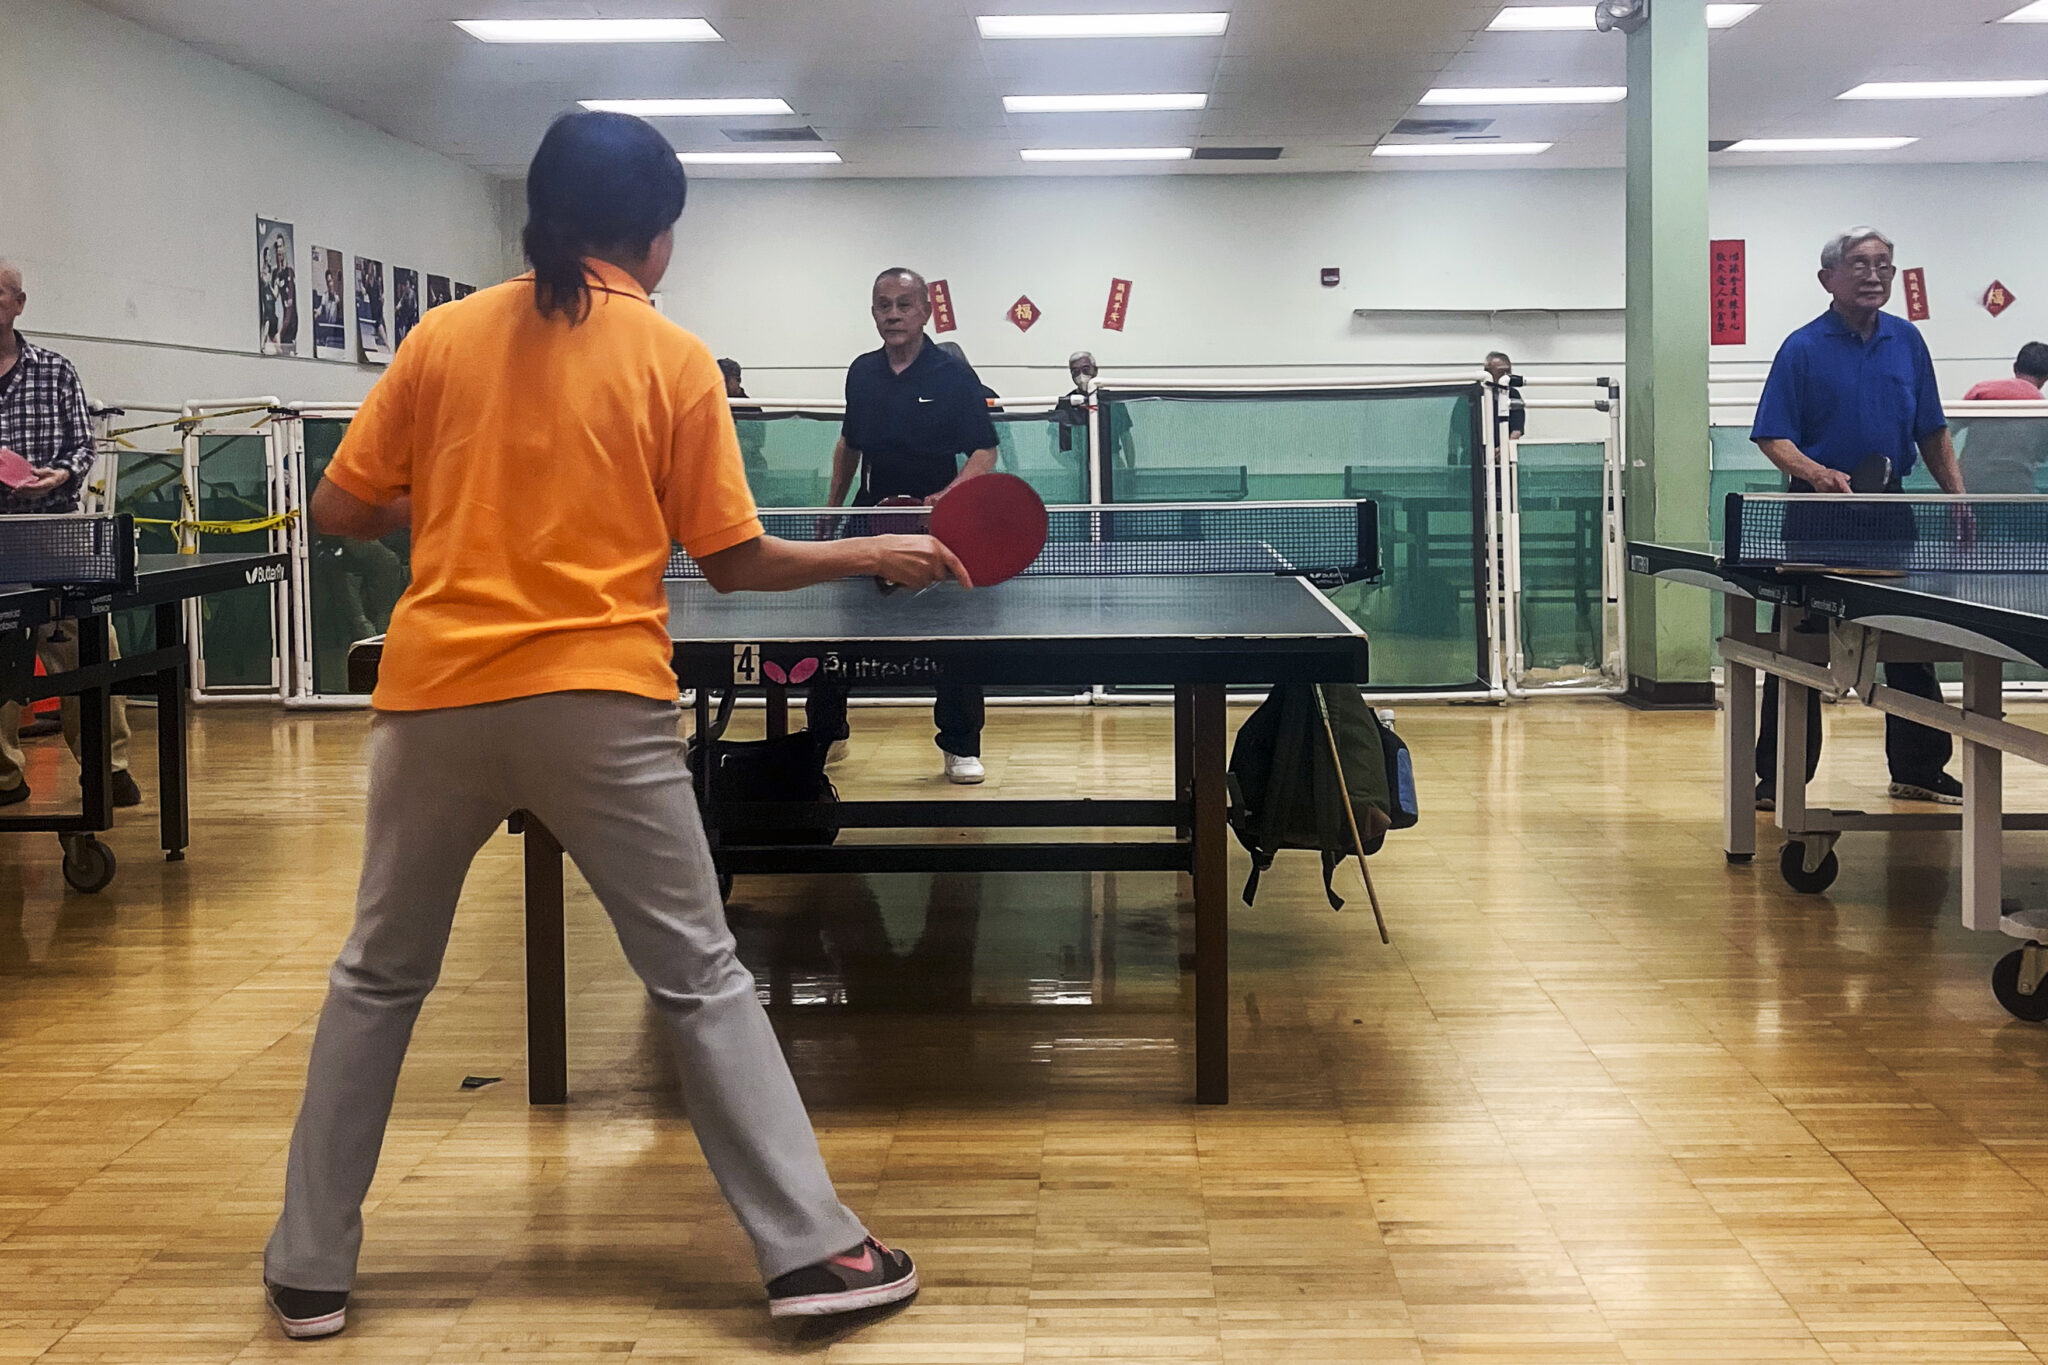 Photo of elders playing table tennis in a large room